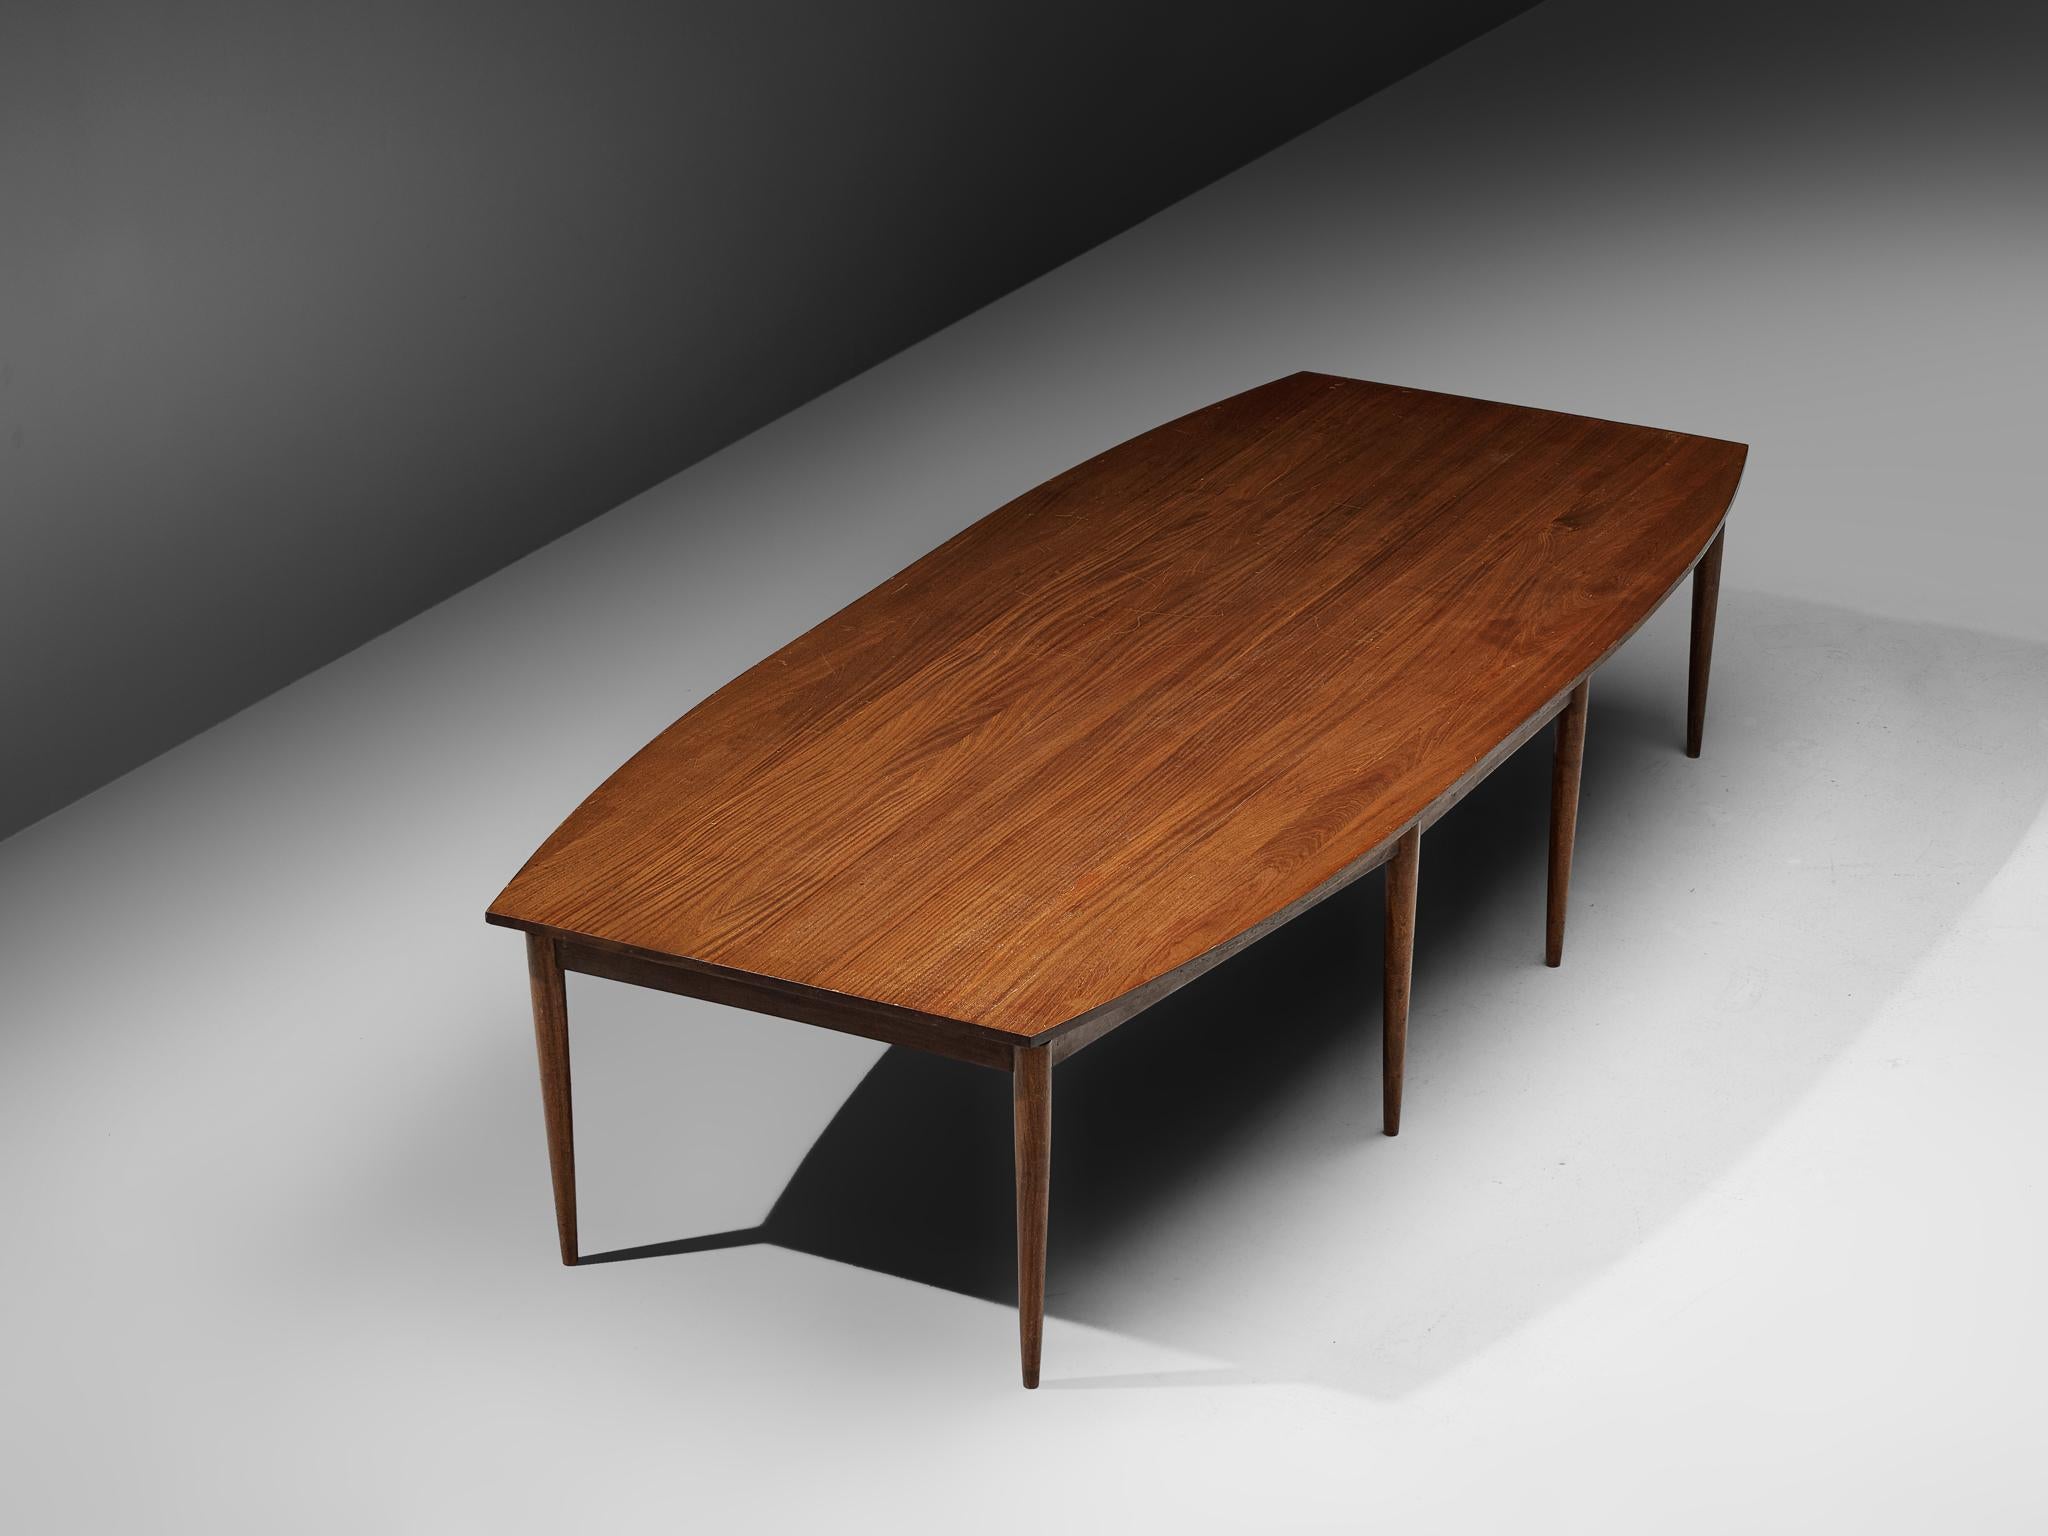 Conference table, in mahogany, Denmark, 1950s.

A 3.6mtr/140in large dining table in mahogany. The boat-shaped table top is made out of one piece, featuring a beautiful grain. The base consists of eight conical legs and shows beautiful straight